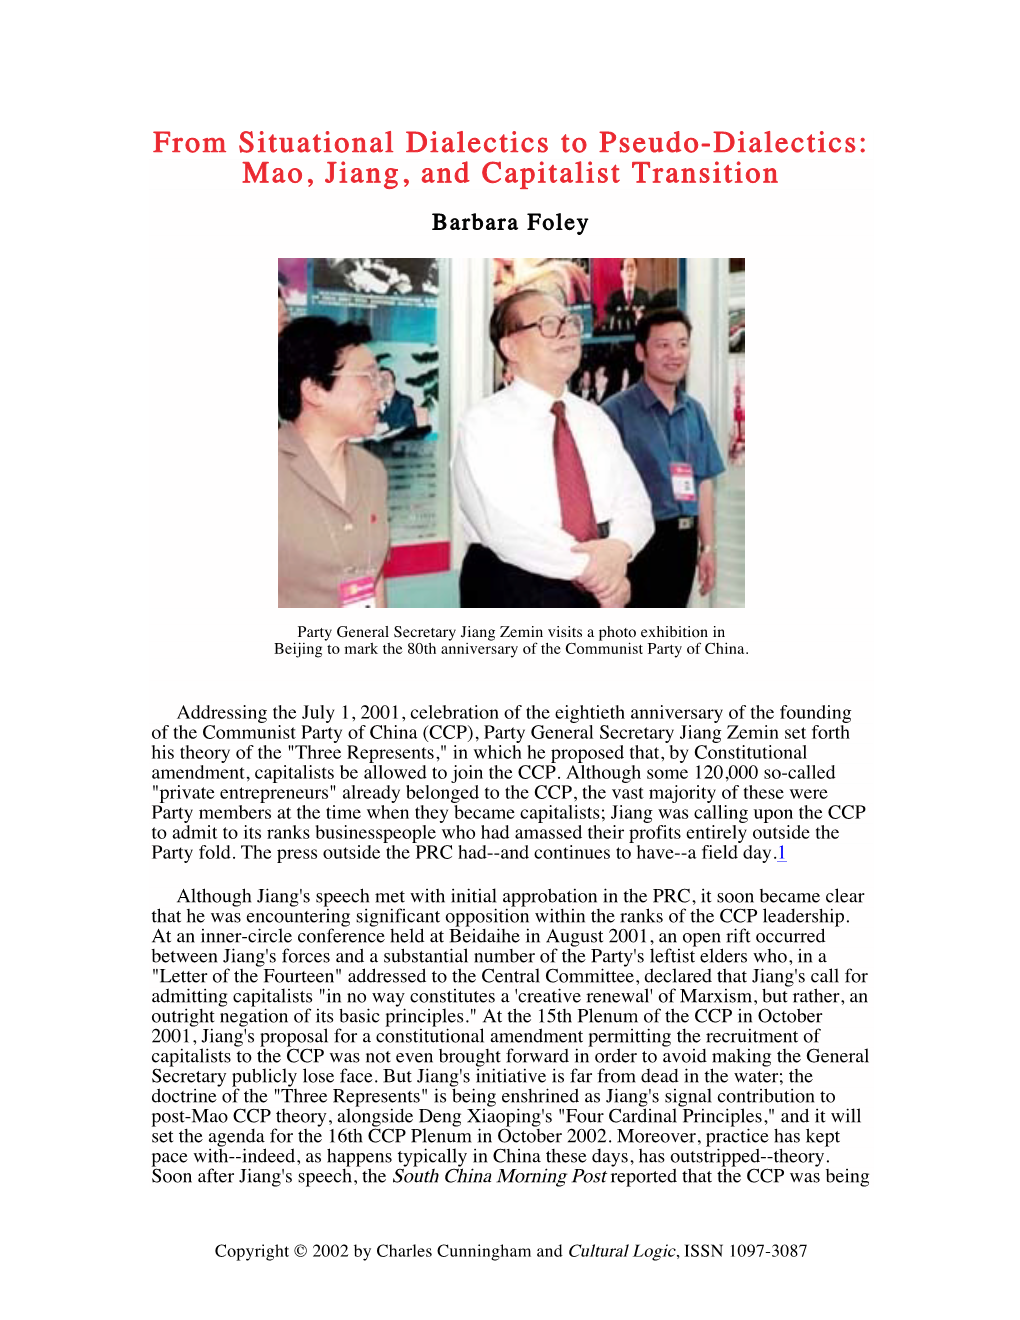 Mao, Jiang, and Capitalist Transition